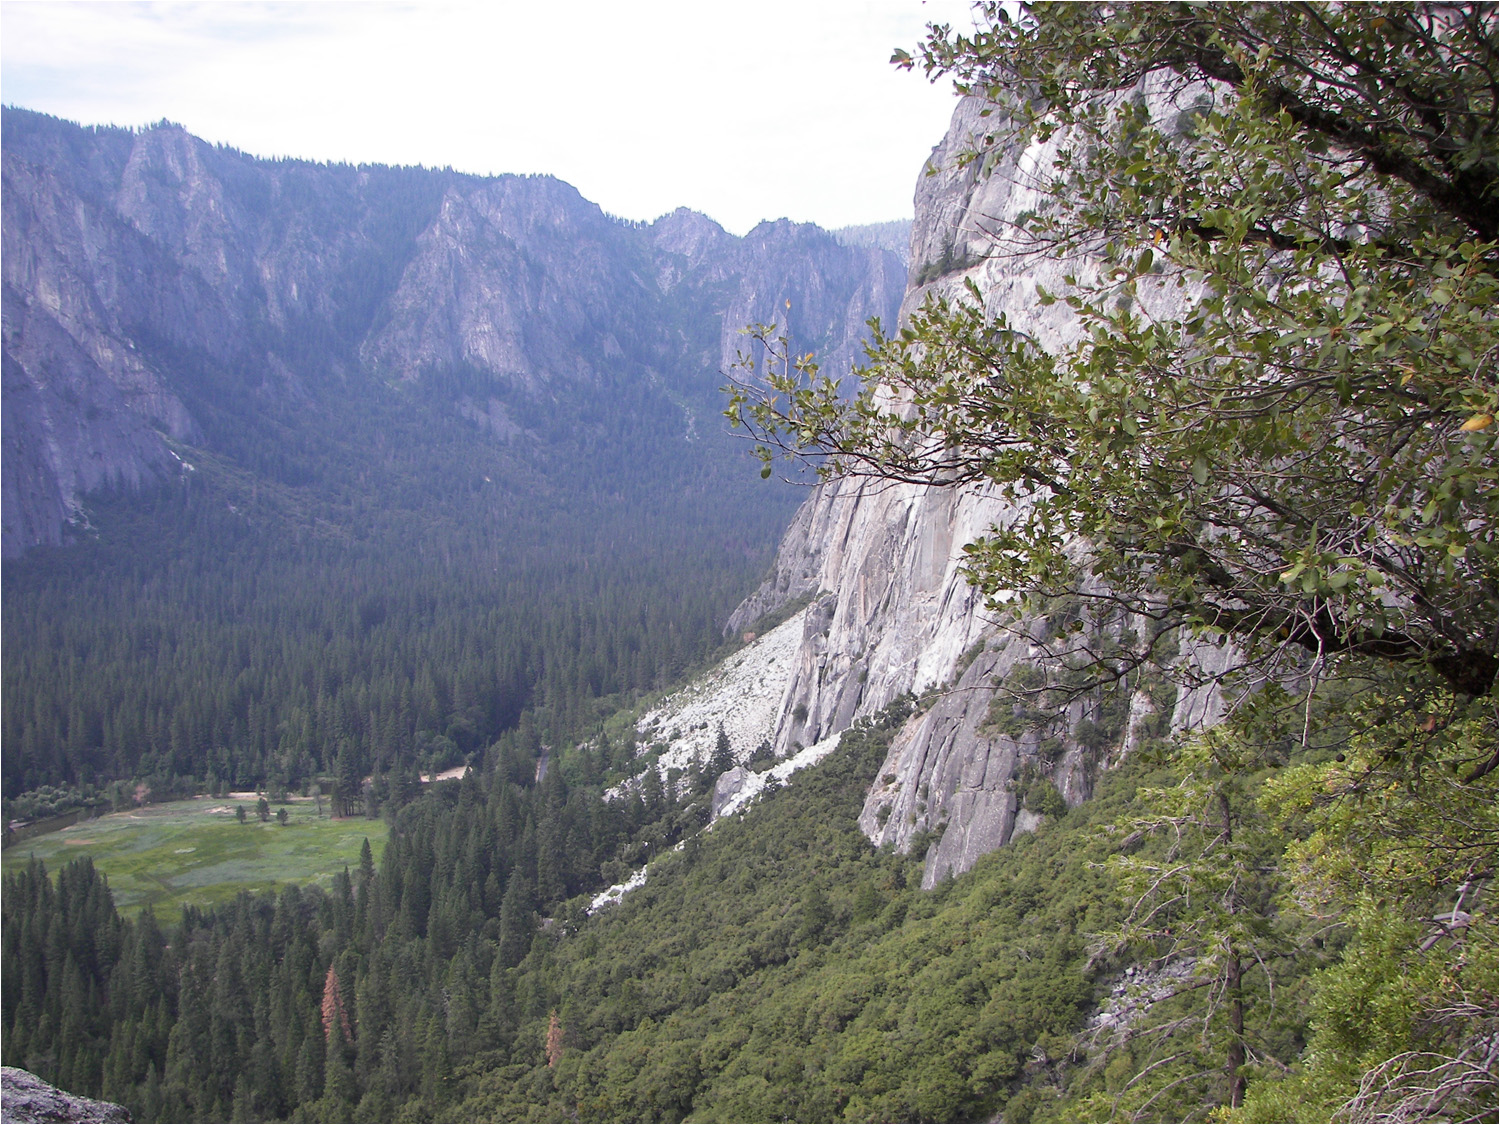 Upper Yosemite Falls Hike- View from trail about 1 hour into hike